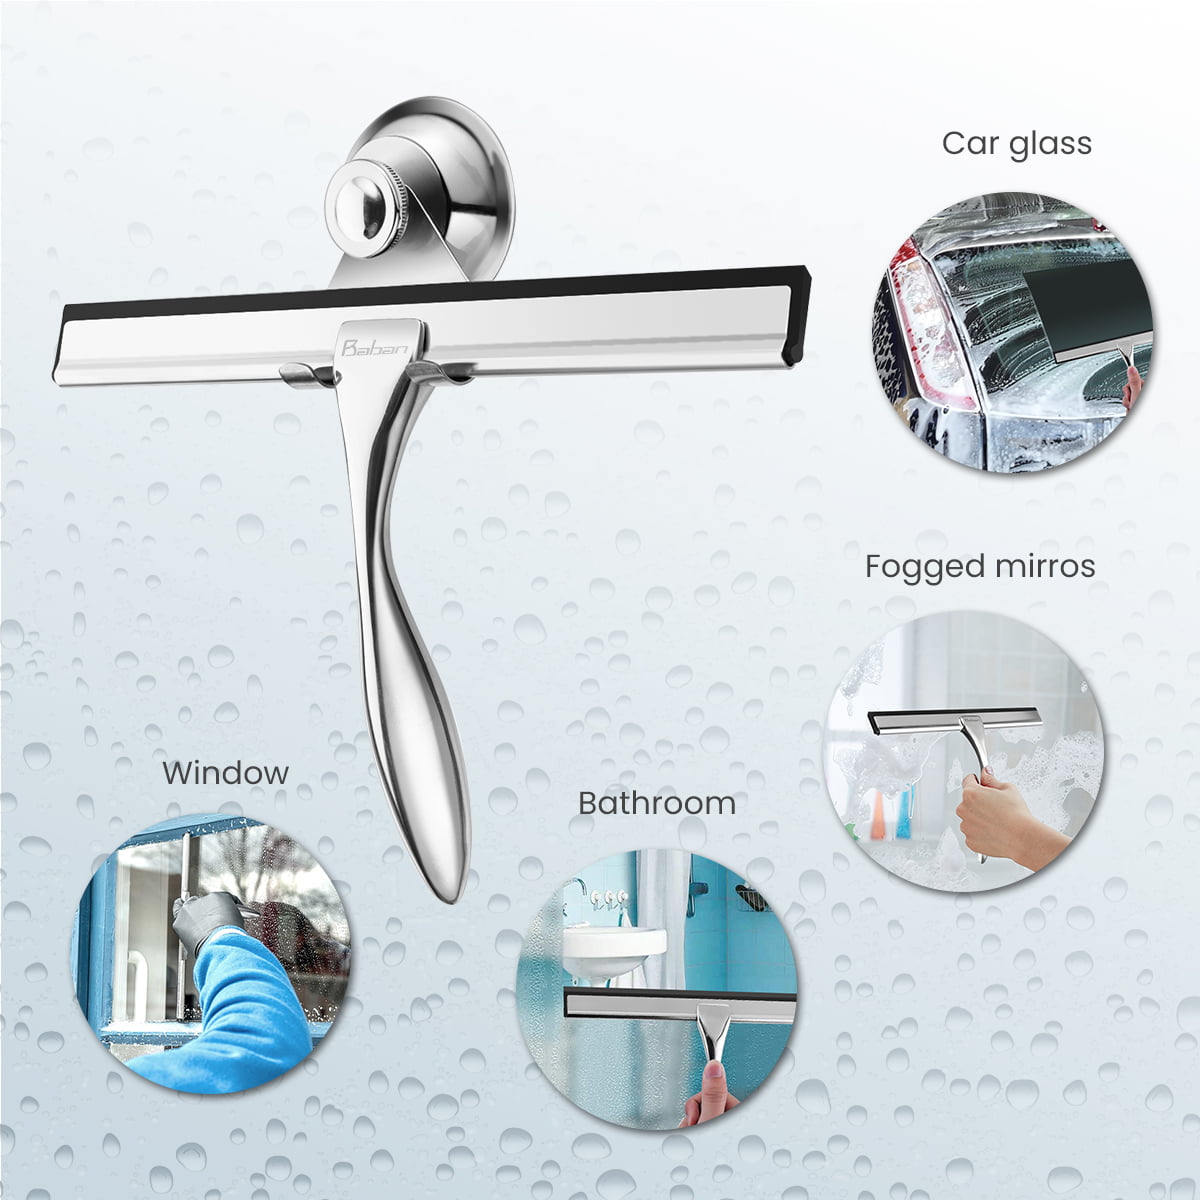 Shower Squeegees Stainless Steel with Suction Cup Hook Window Squeegees for Bathroom Mirror Wiper